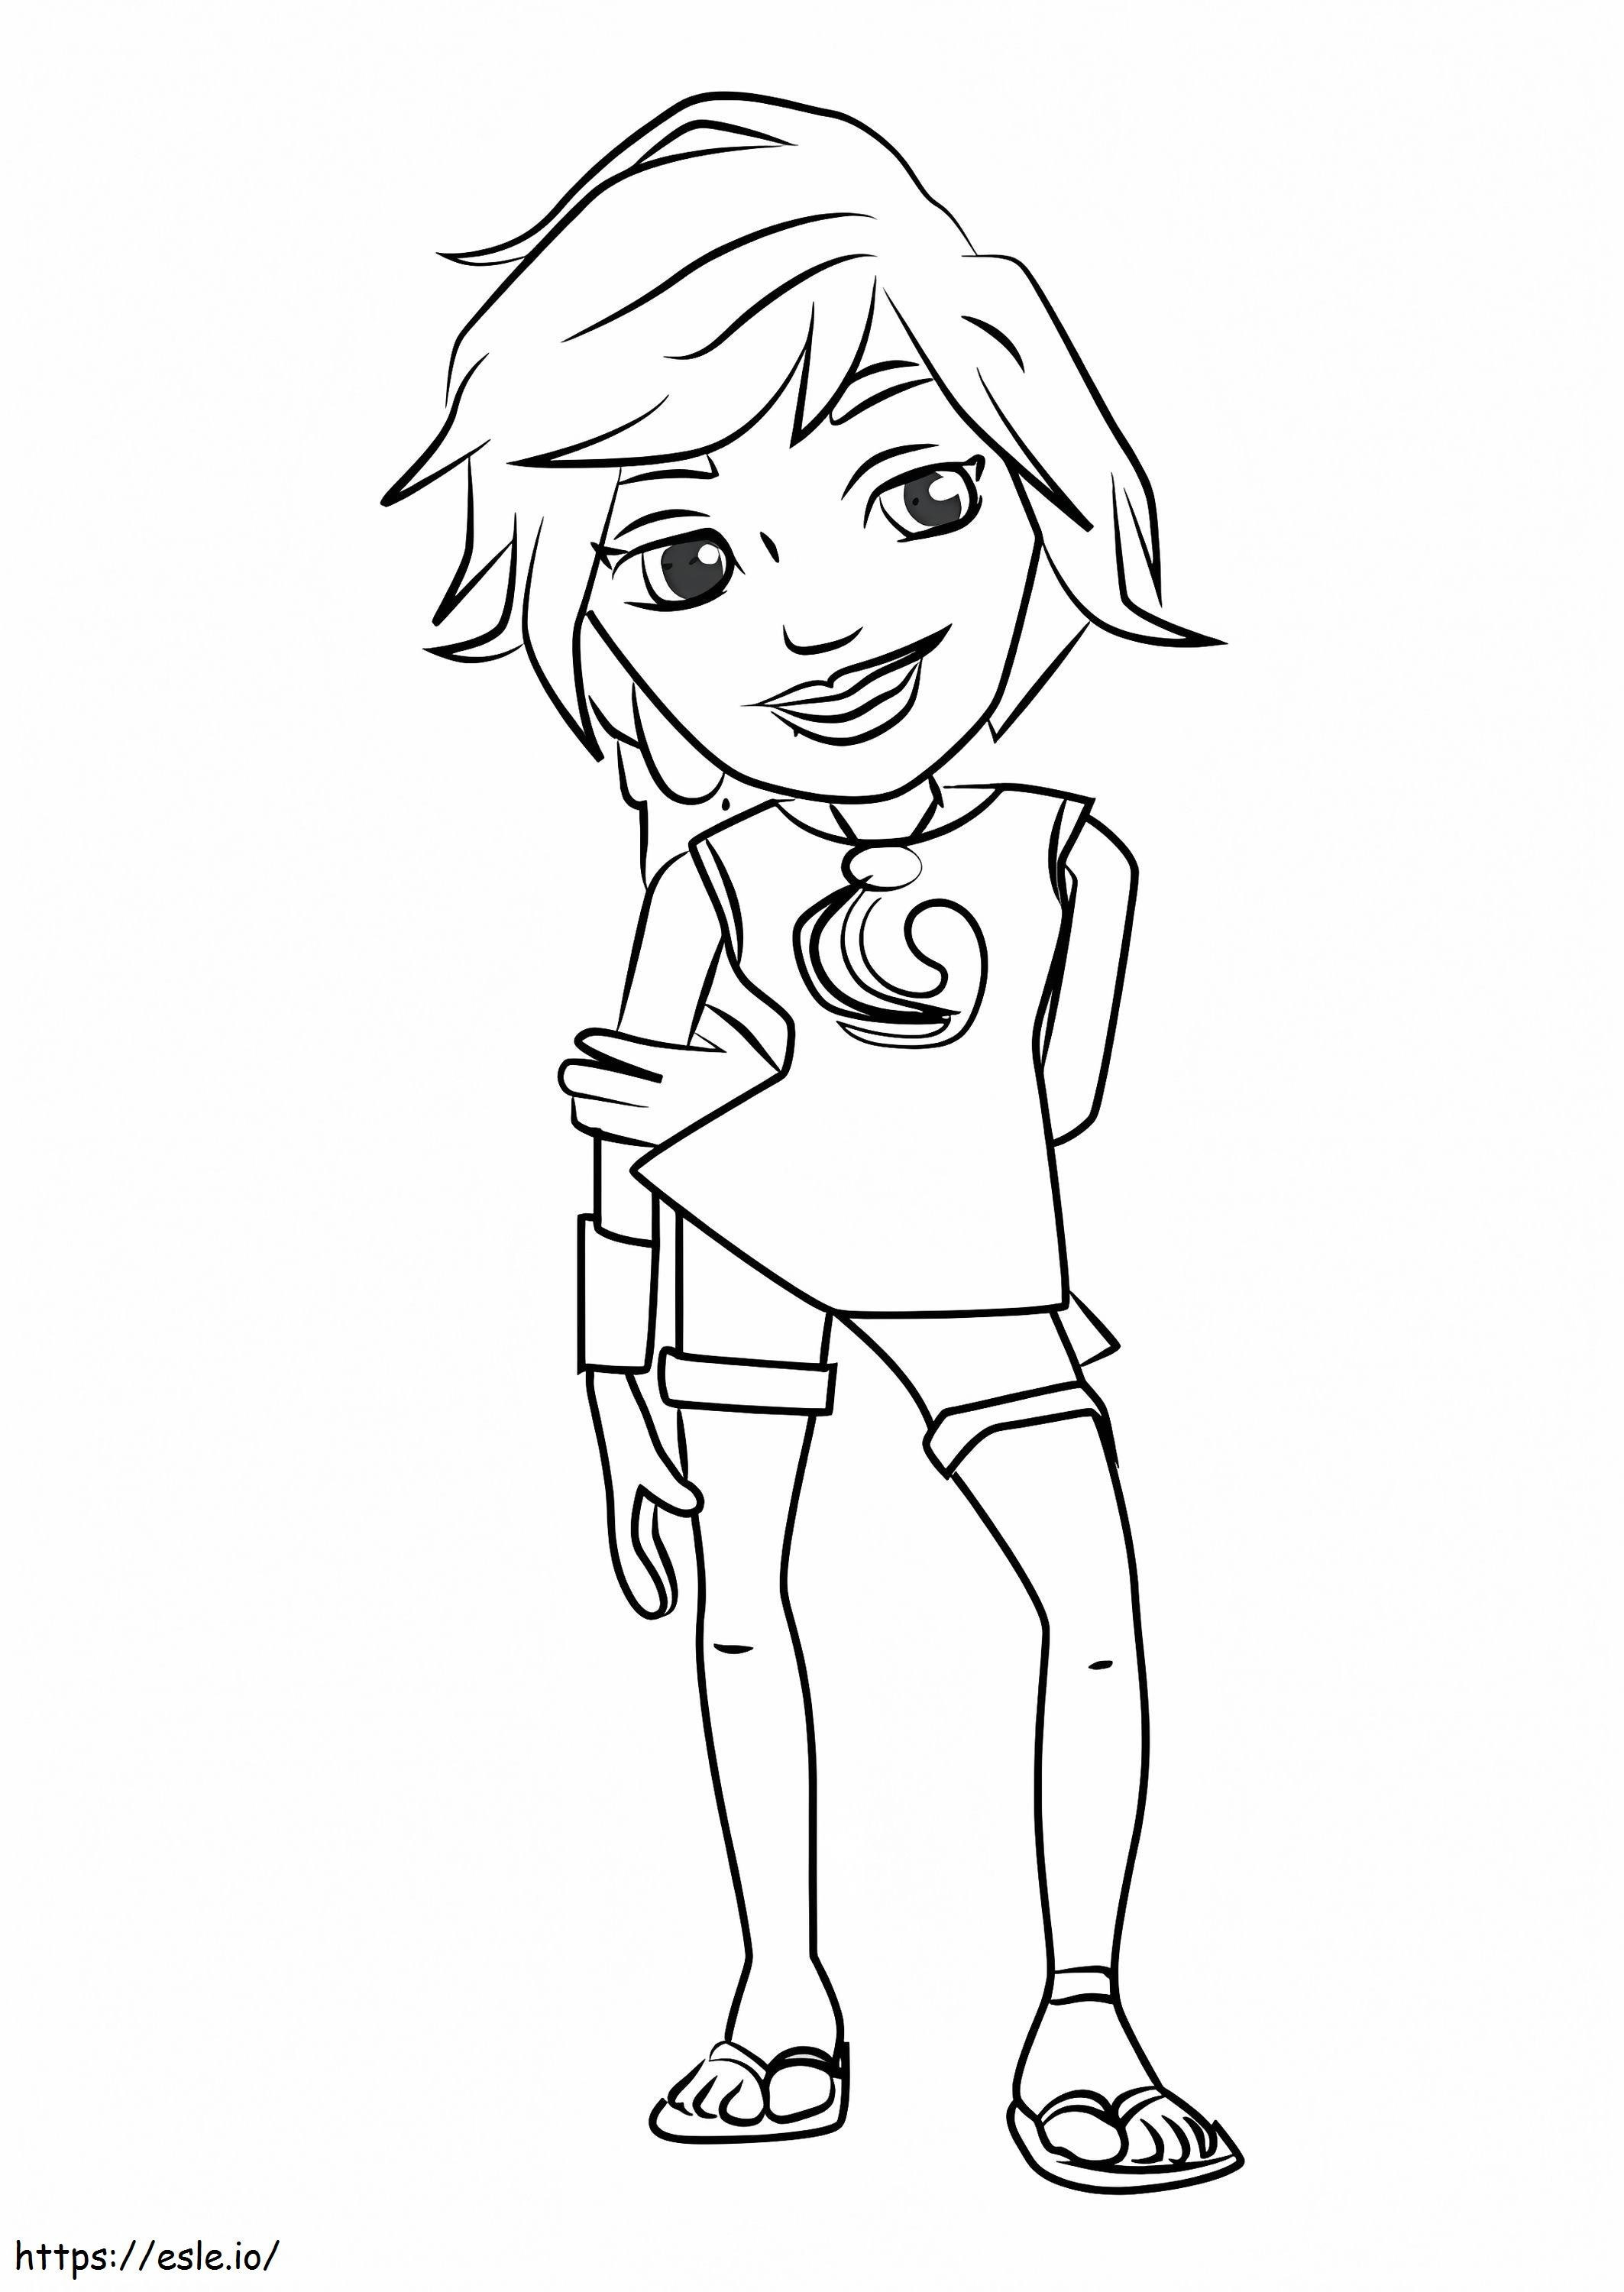 Kim From Subway Surfers coloring page